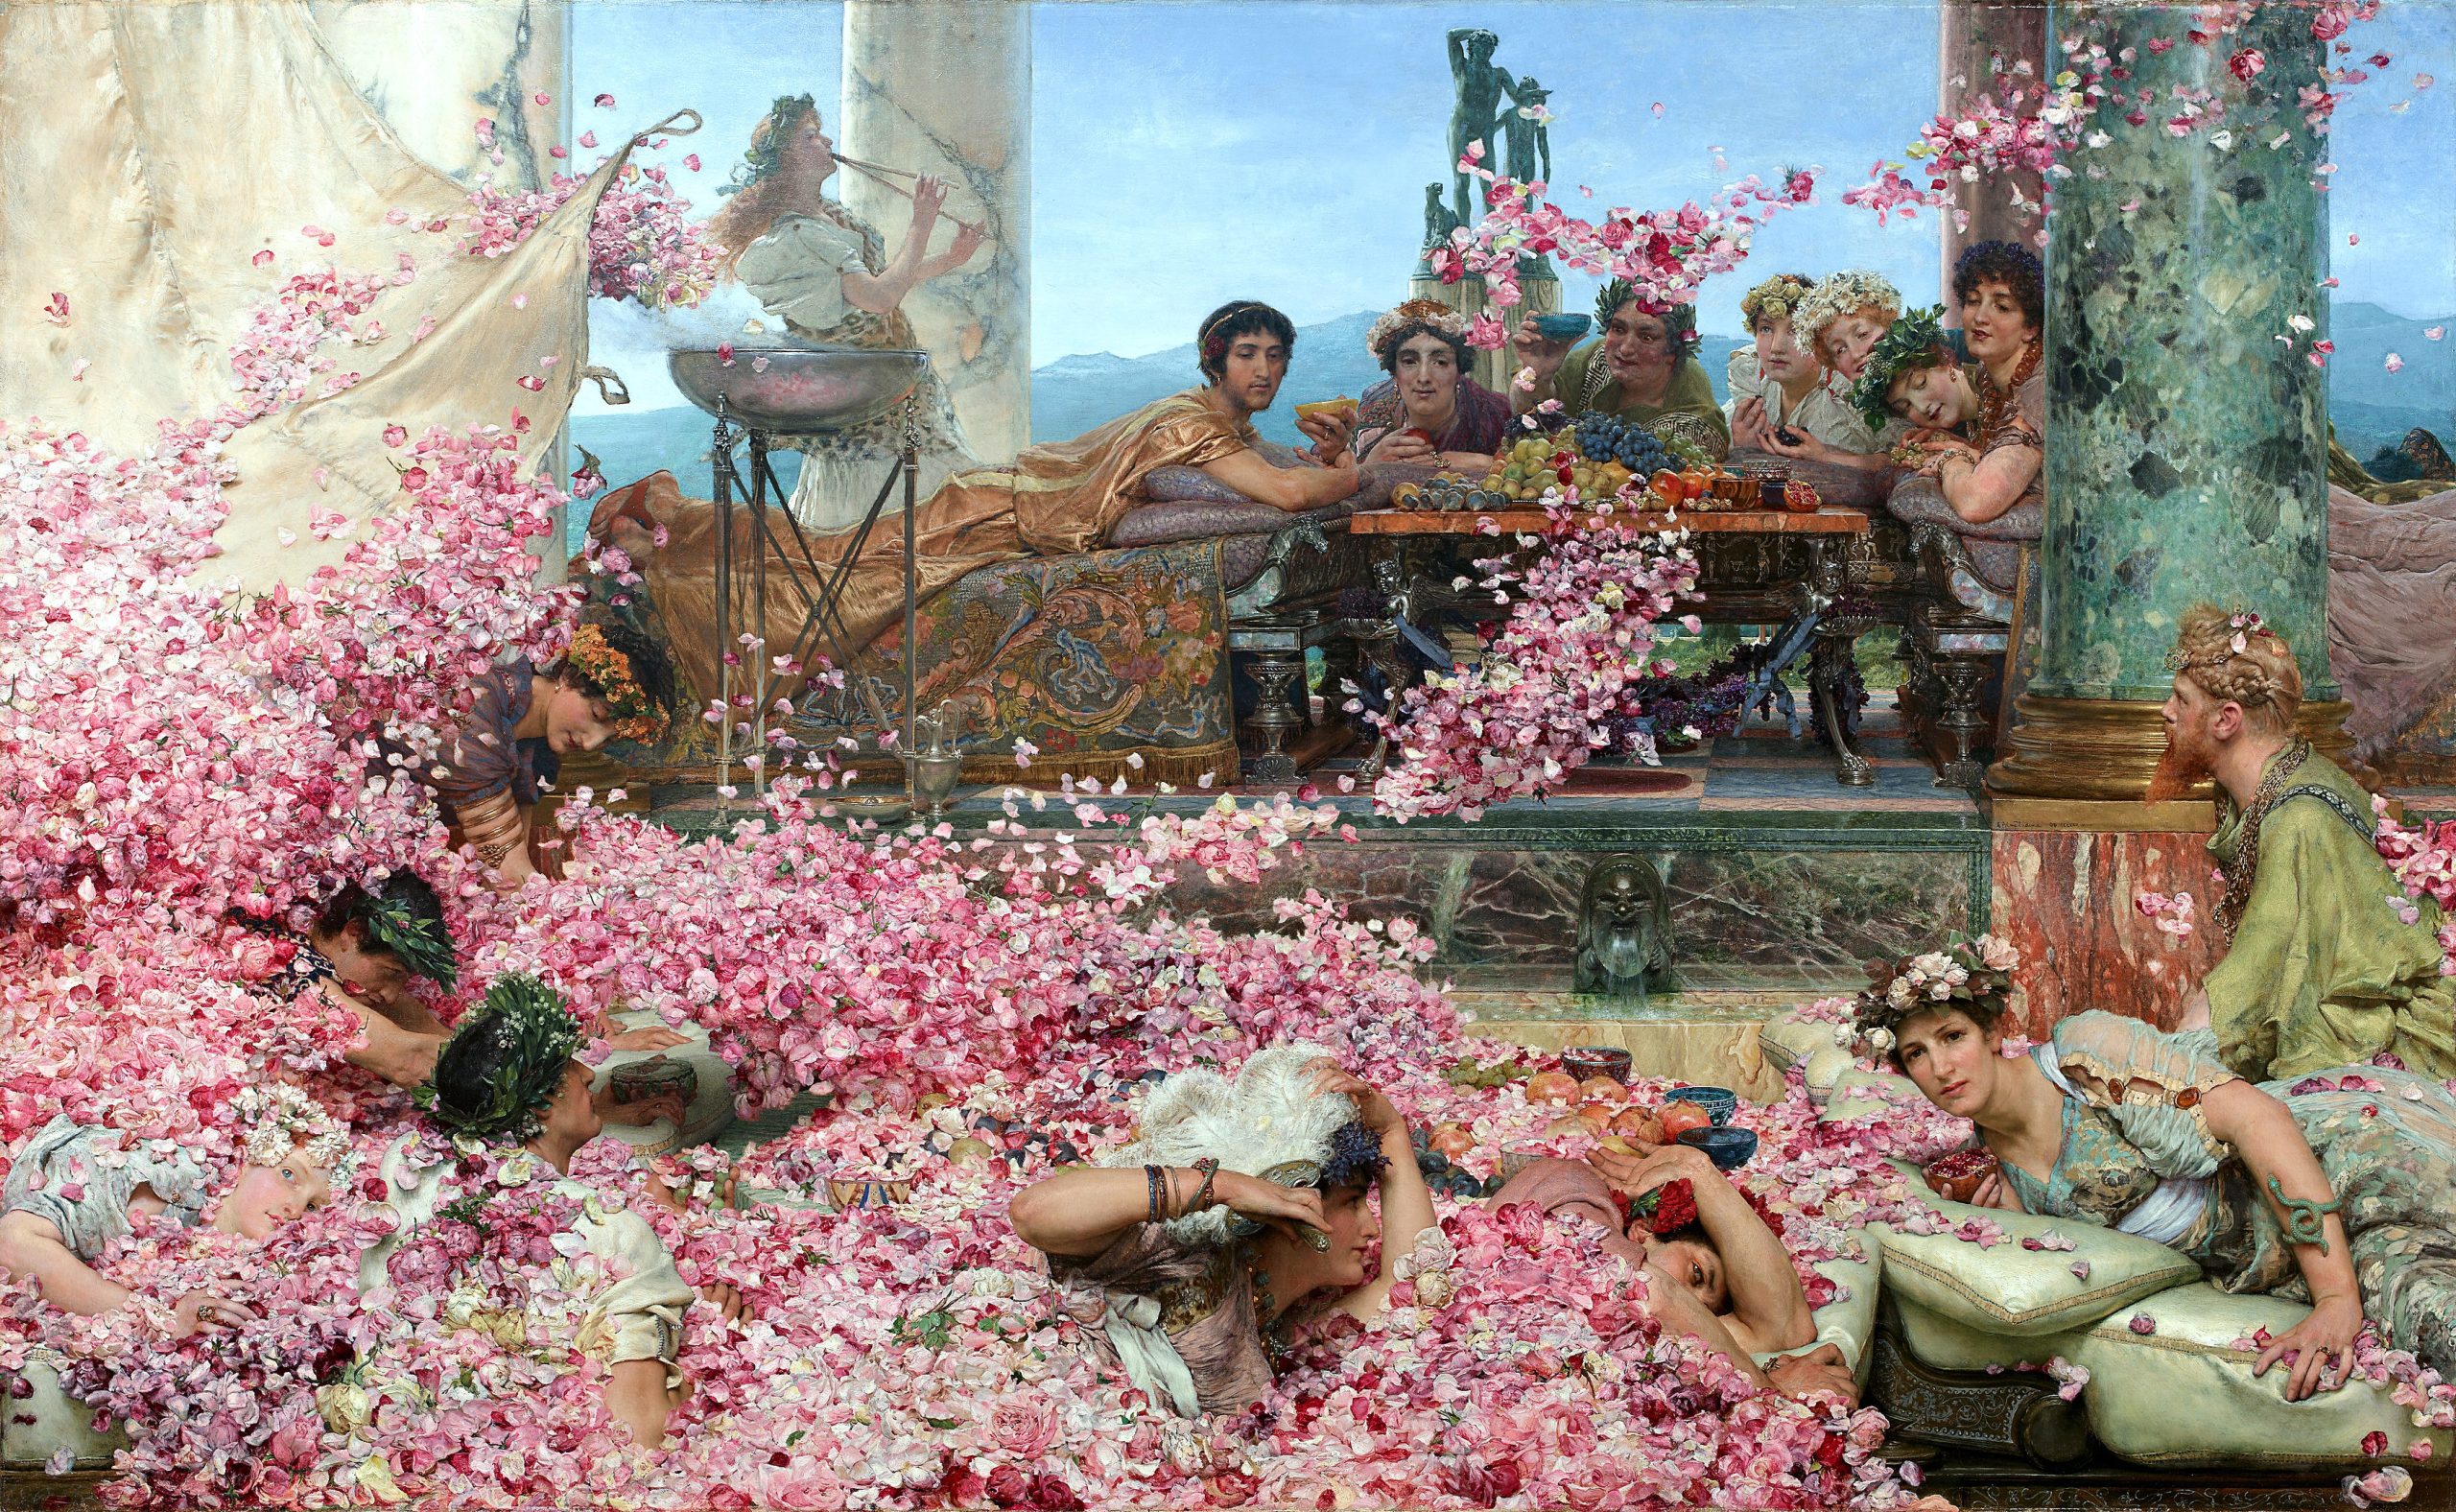 Figures relaxing in a palace filled with pink flowers